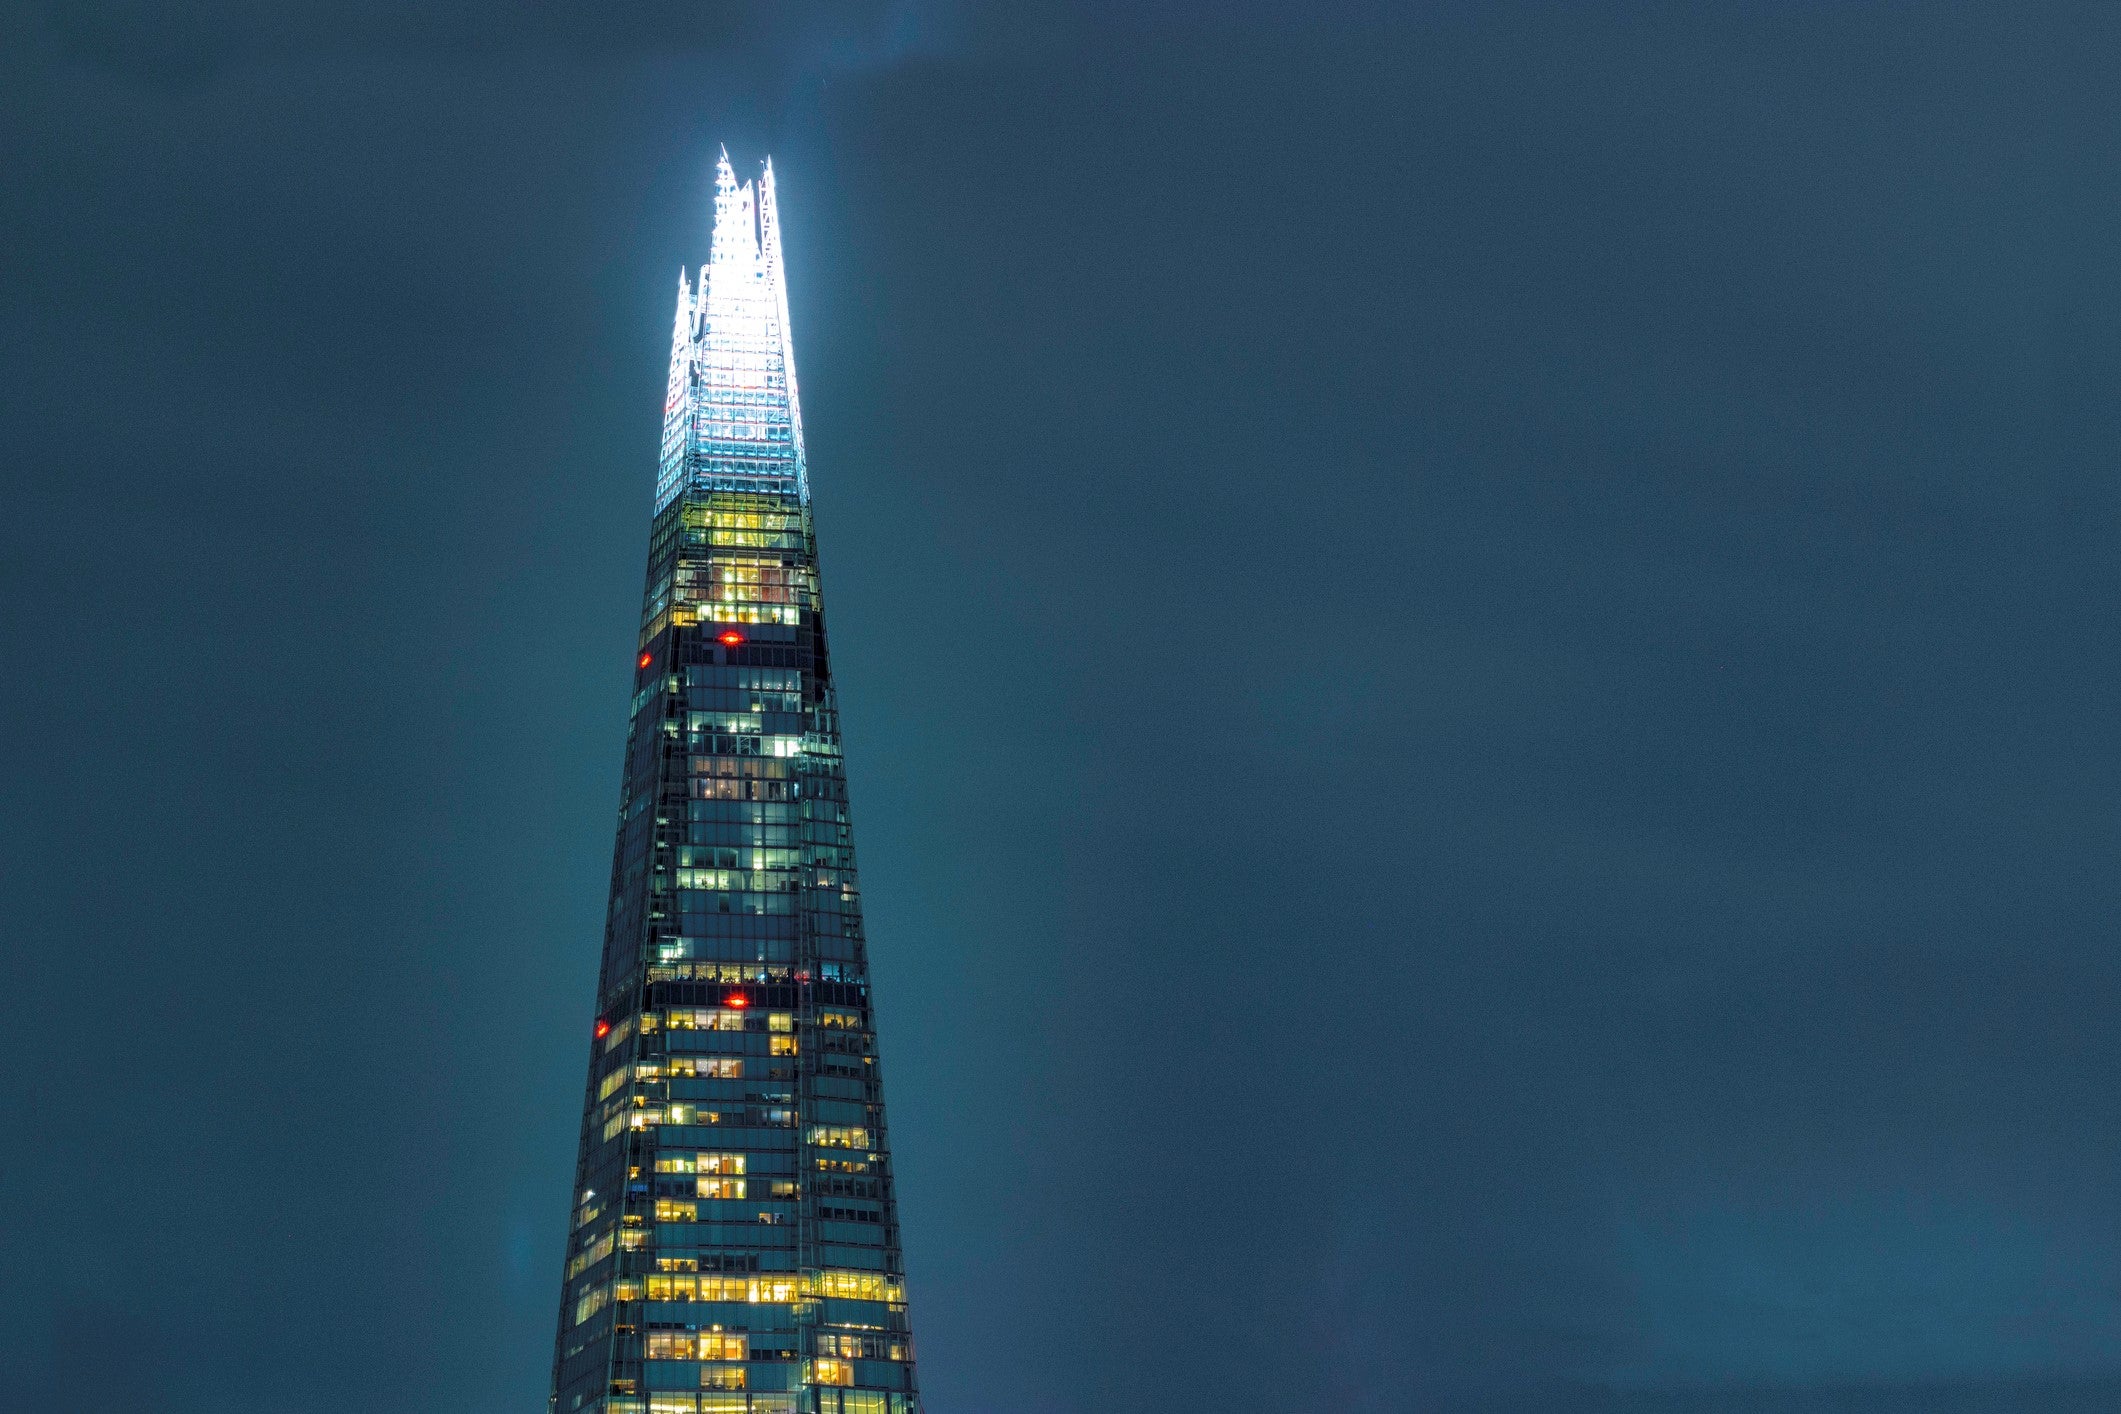 The Shard is western Europe's tallest building